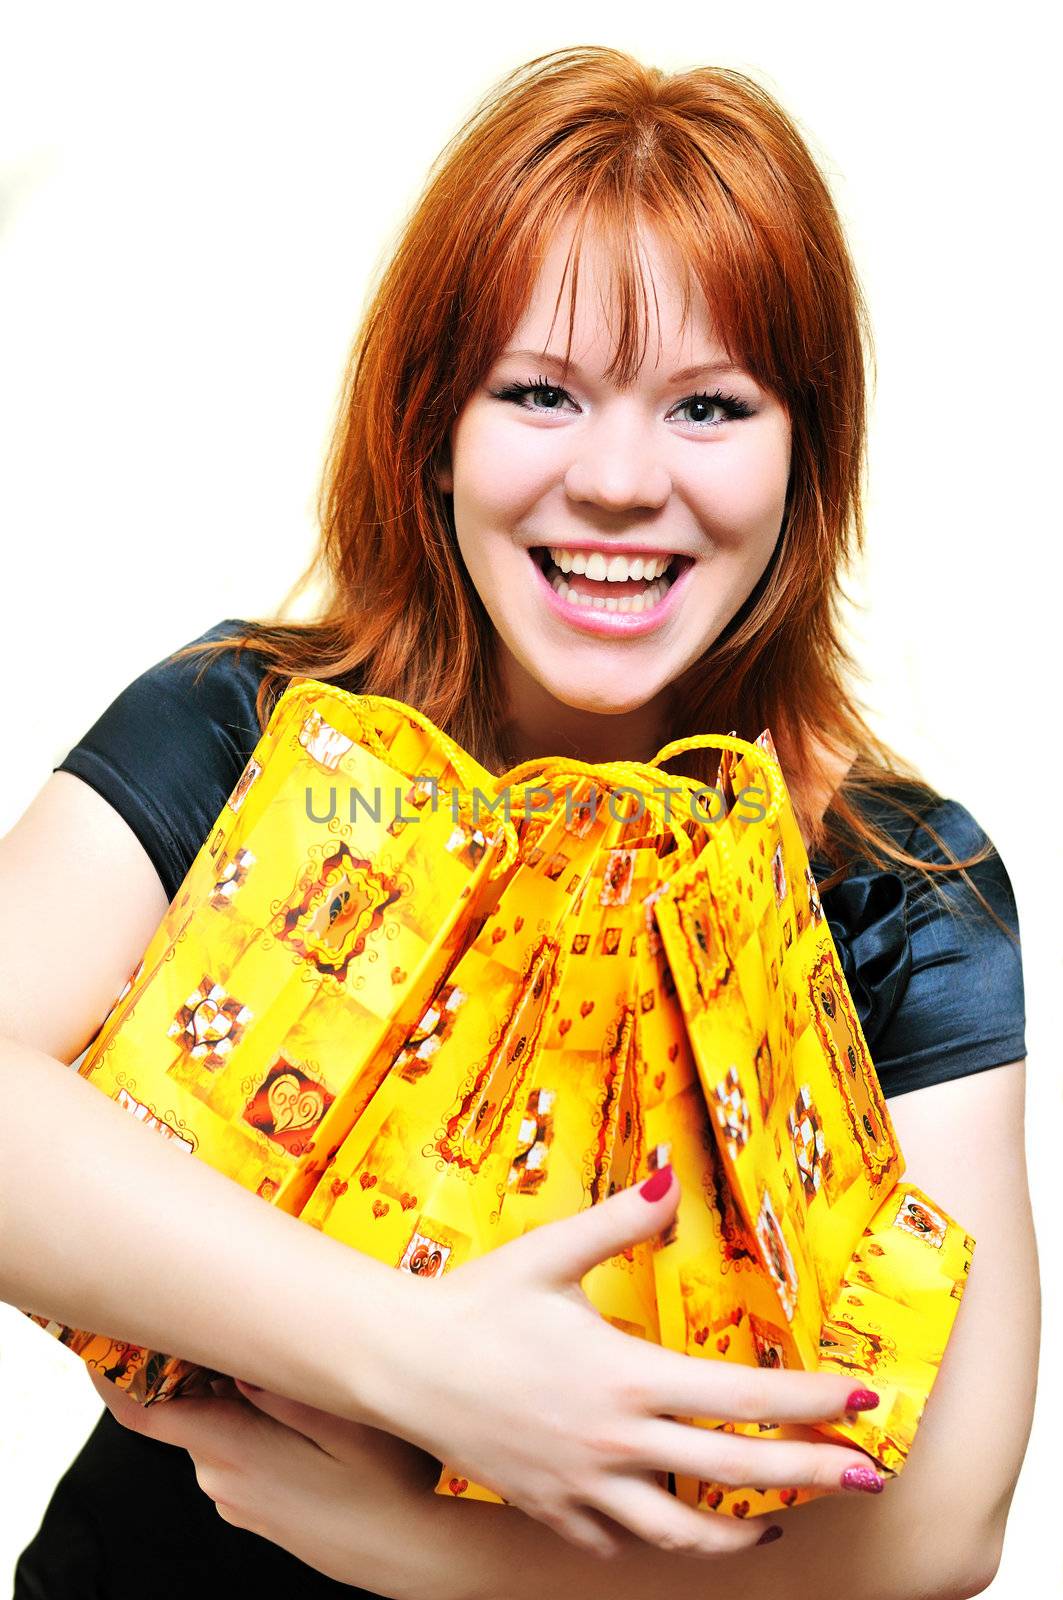 redheaded laughing girl after shopping over the white